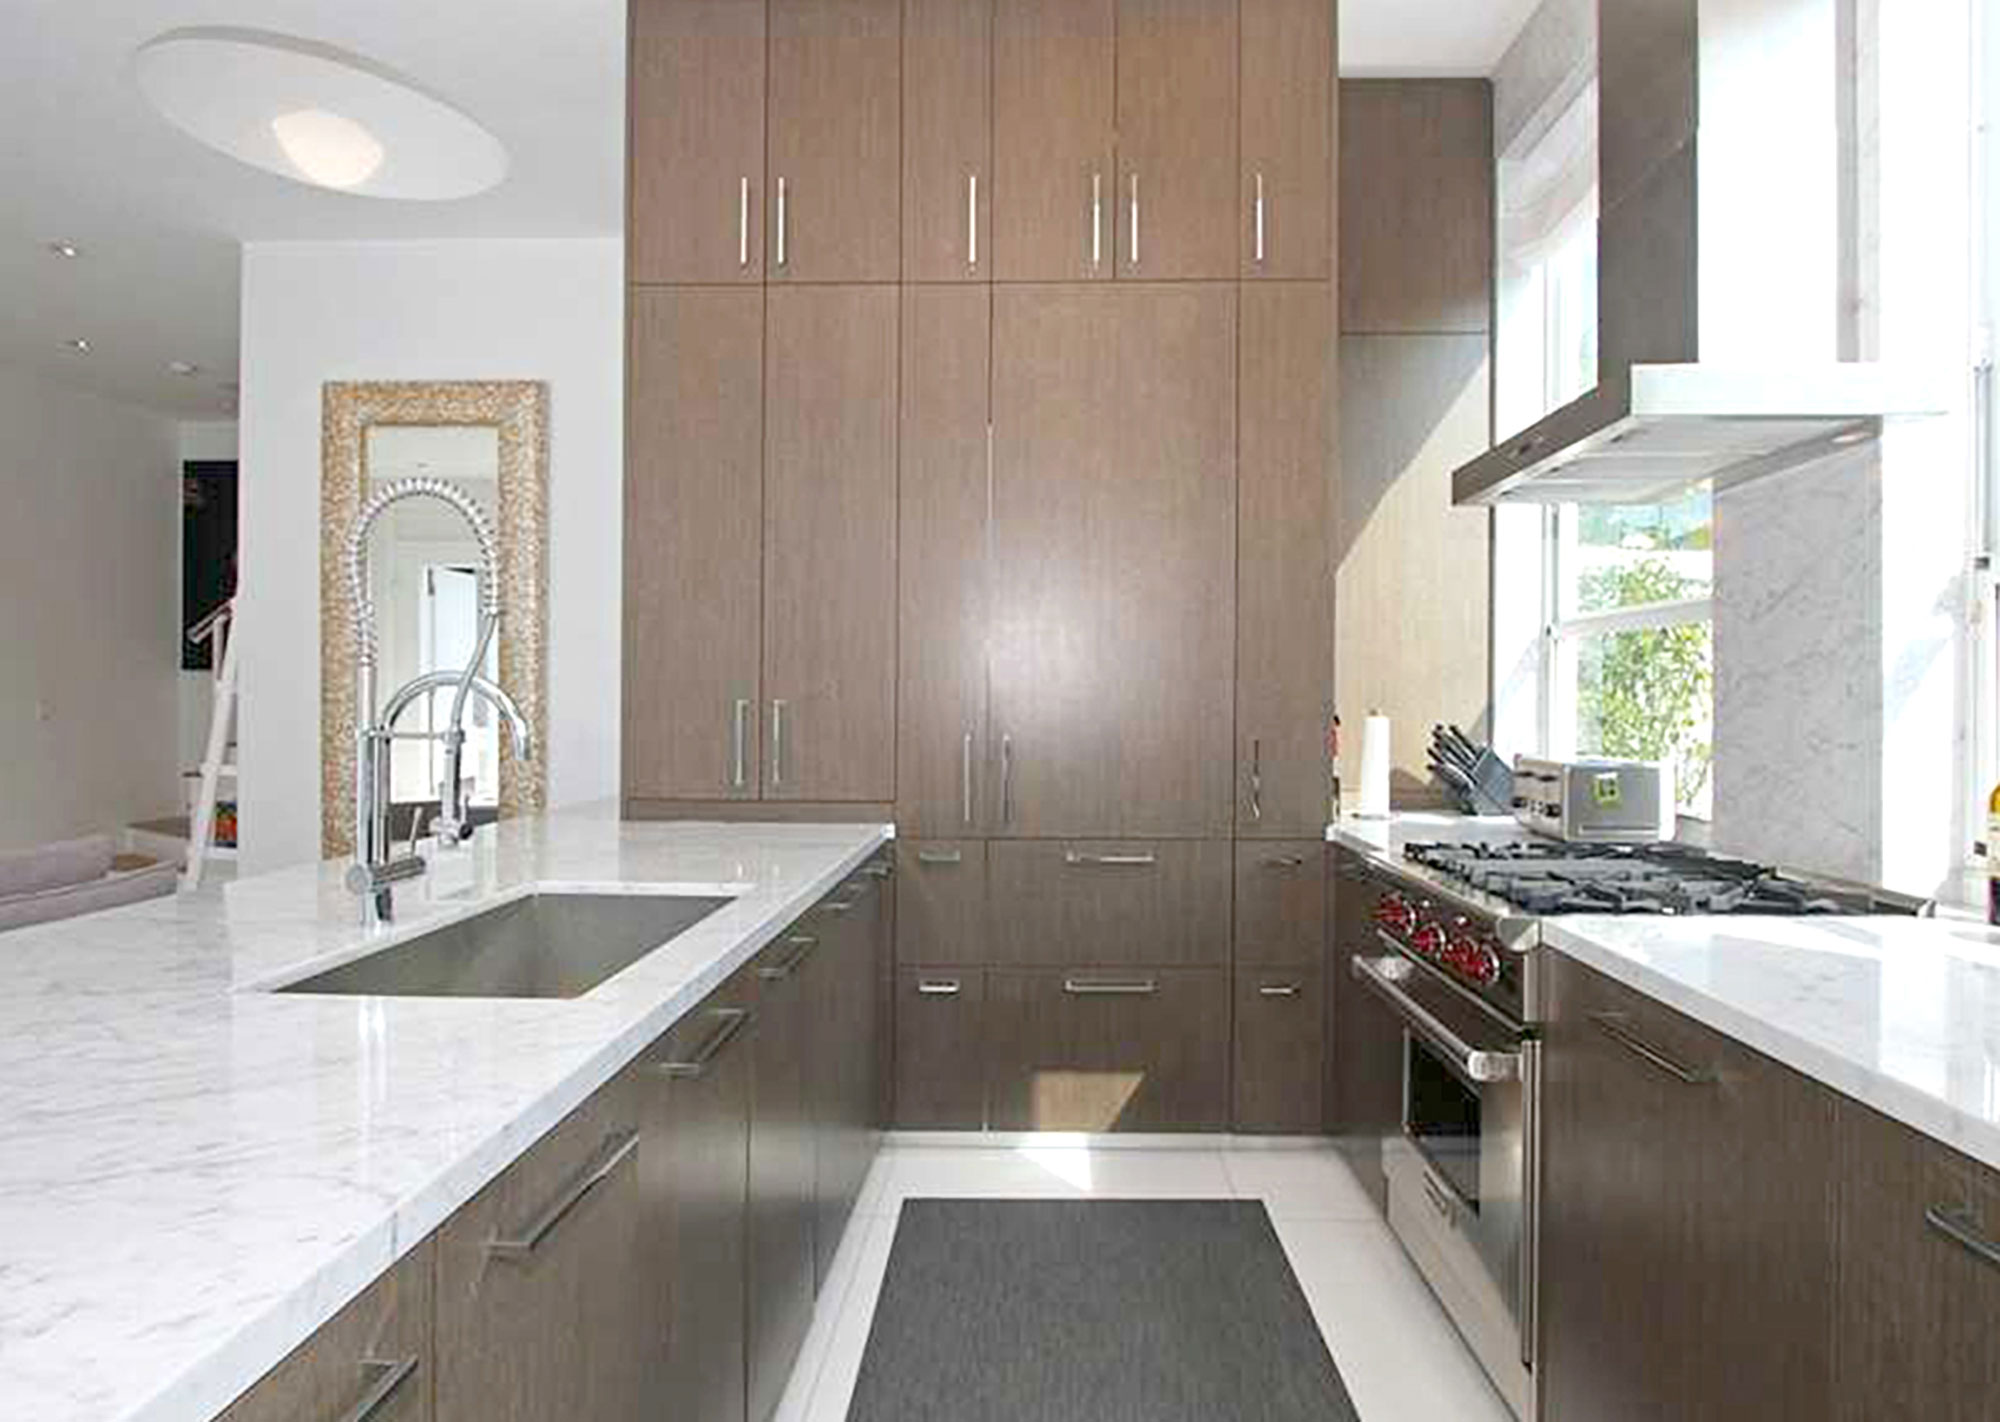 quality custom cabinetry, pantry cabinets, custom cabinets-north bay road 1, custom cabinetry